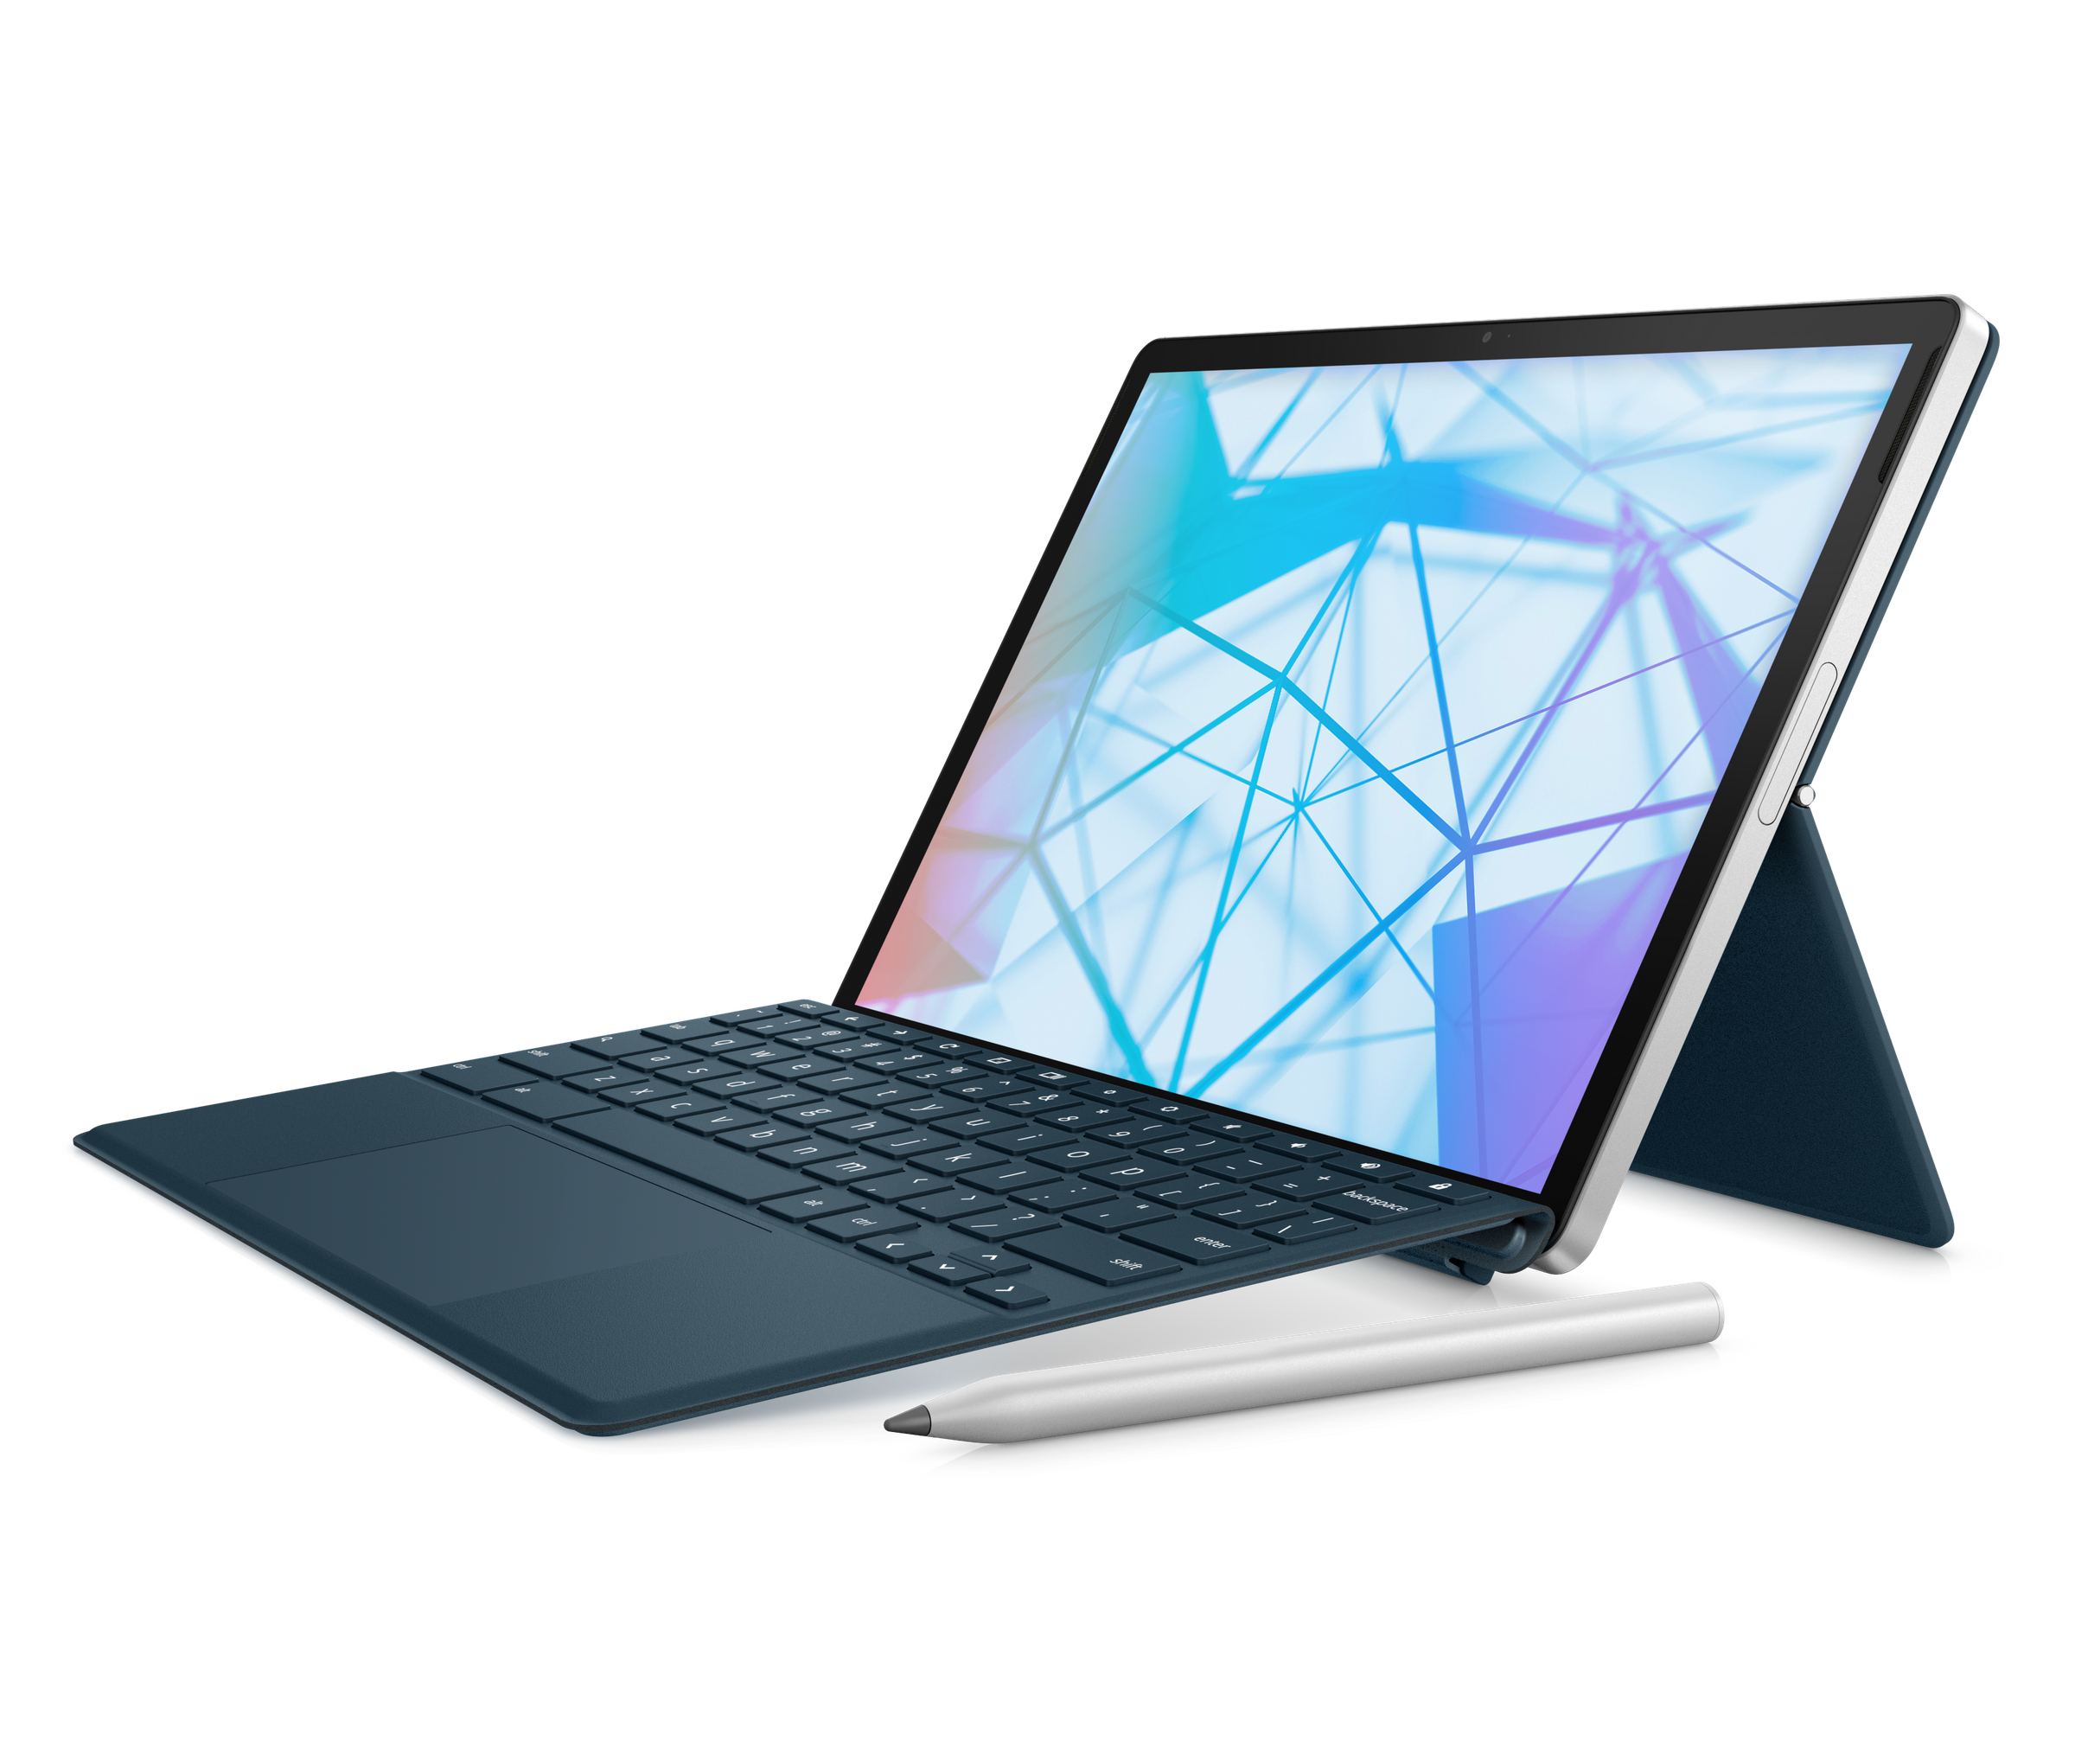 The Qualcomm-powered Chromebook x2 11 comes with a detachable keyboard, kickstand, and rechargeable pen.